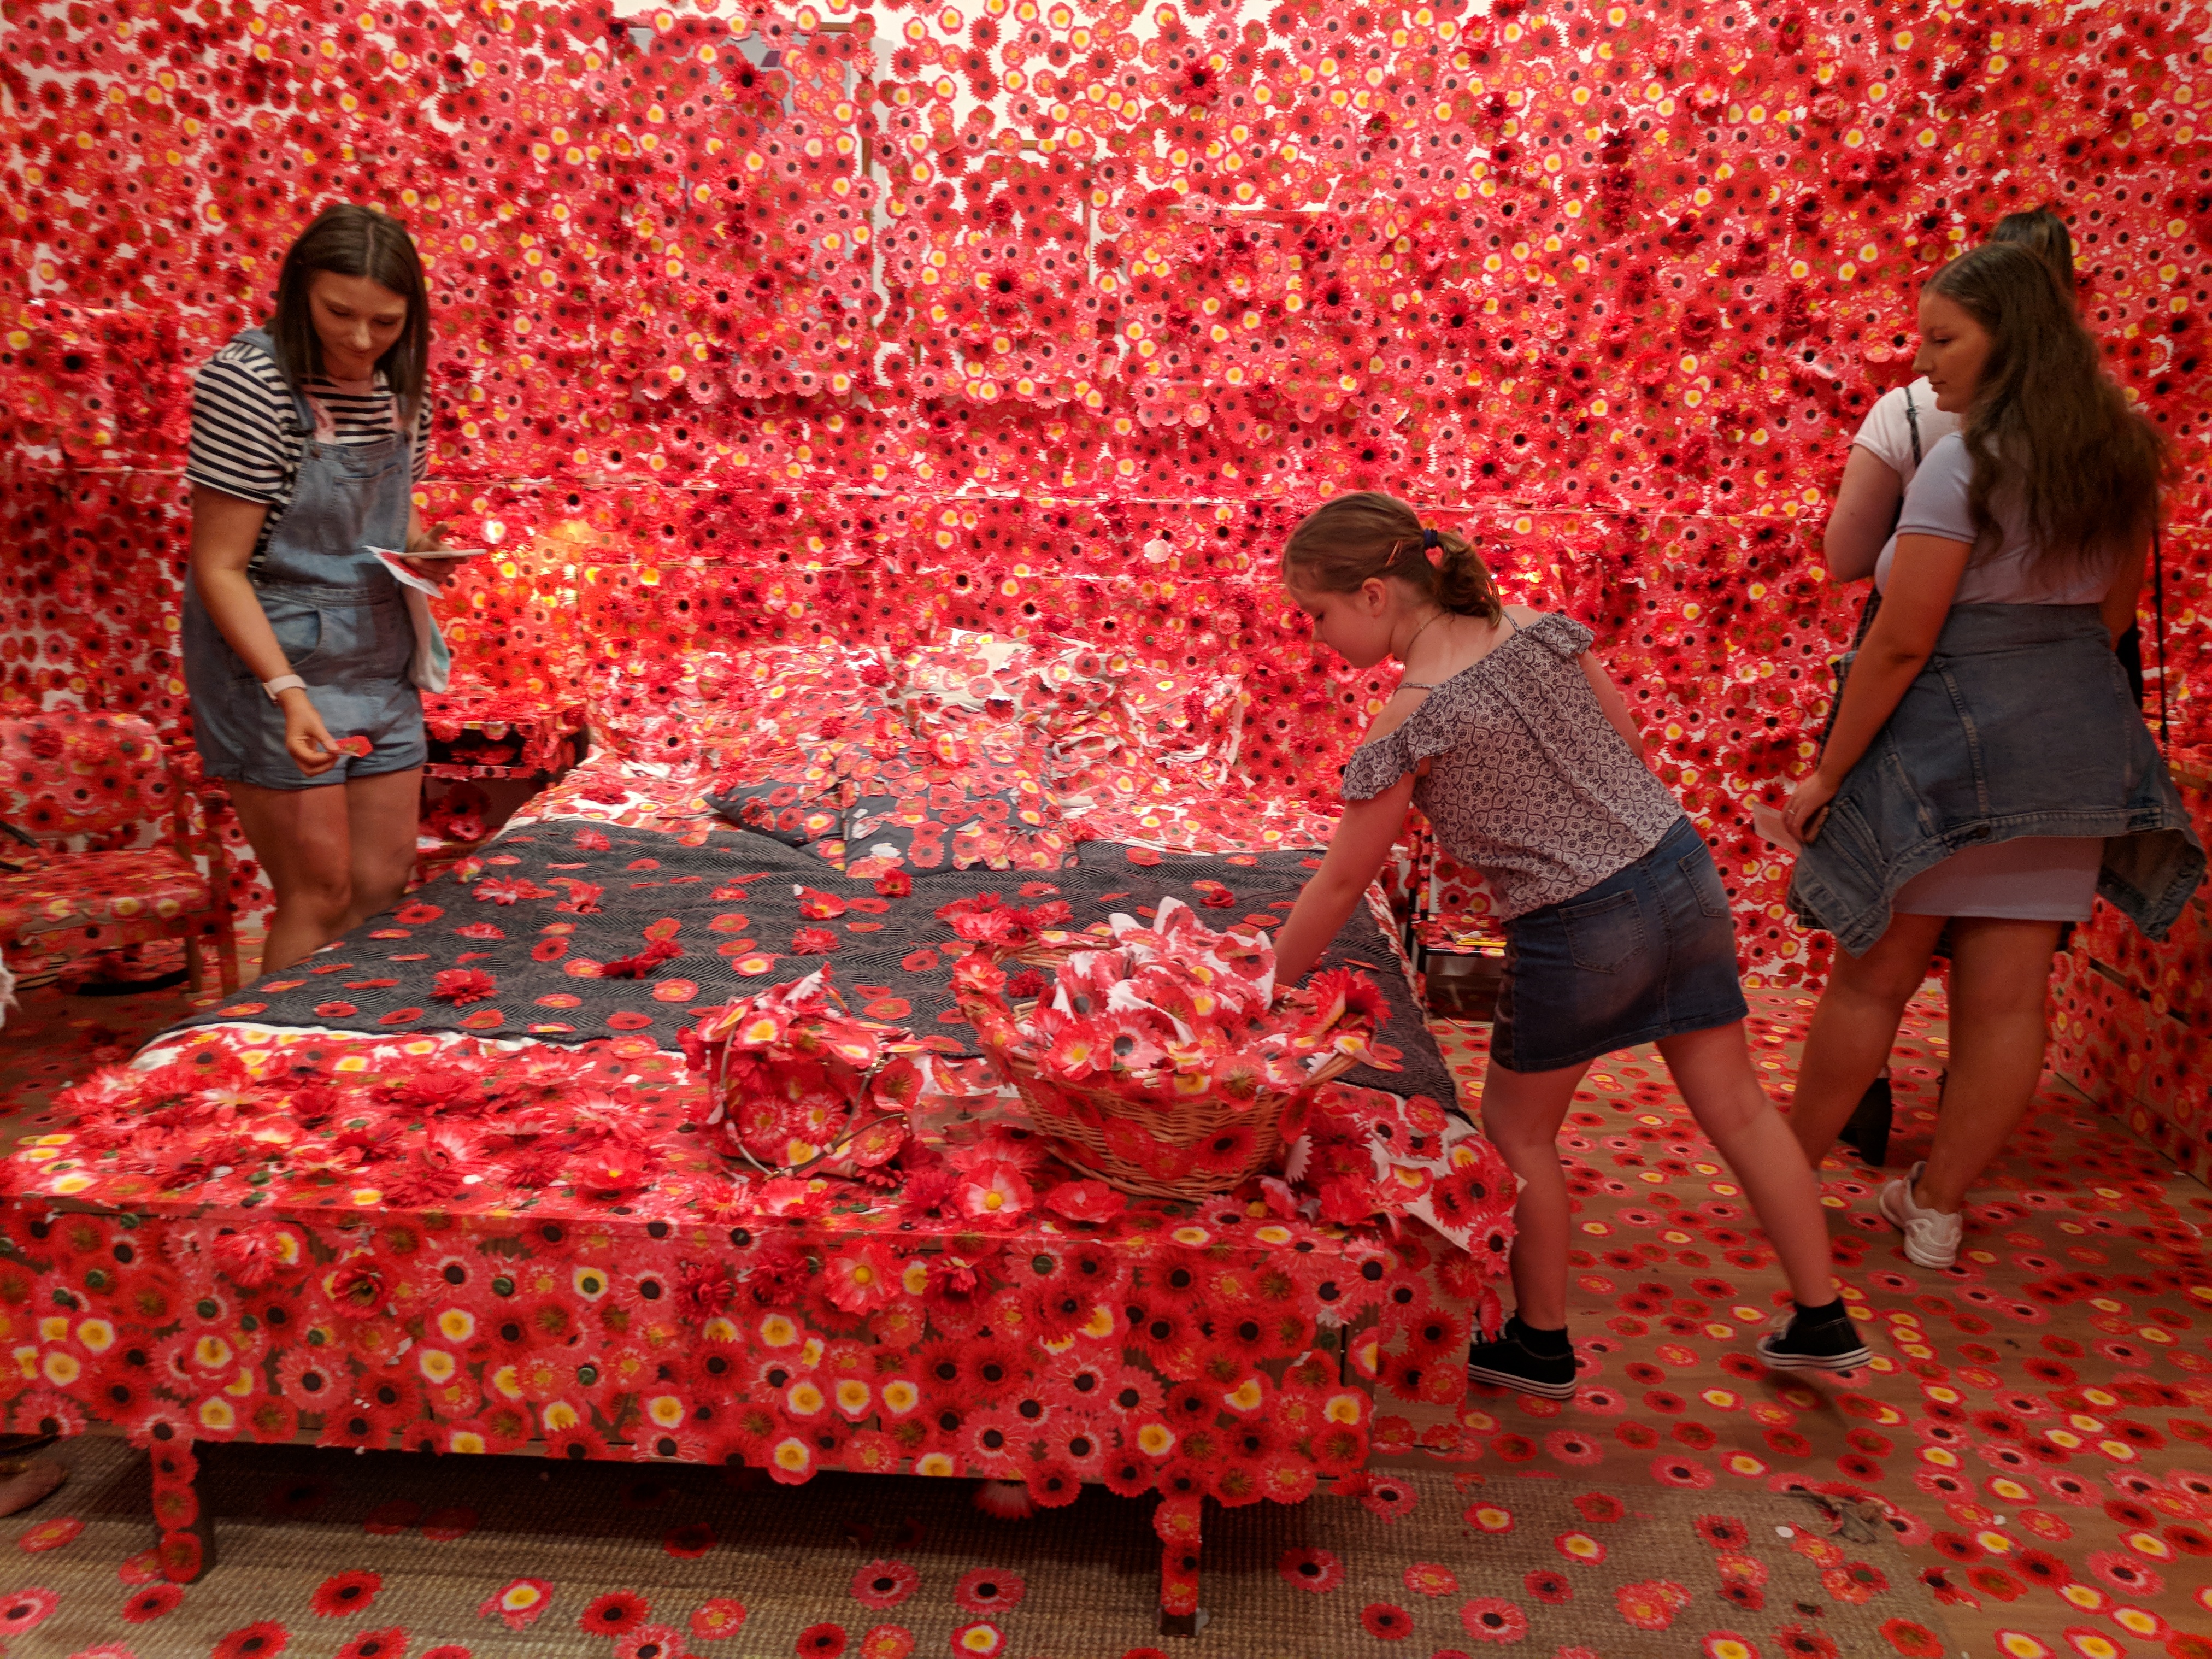 204--in YAYOI KUSAMA FLOWER OBSESSION exhibit we got to add a flower to the masterpiece